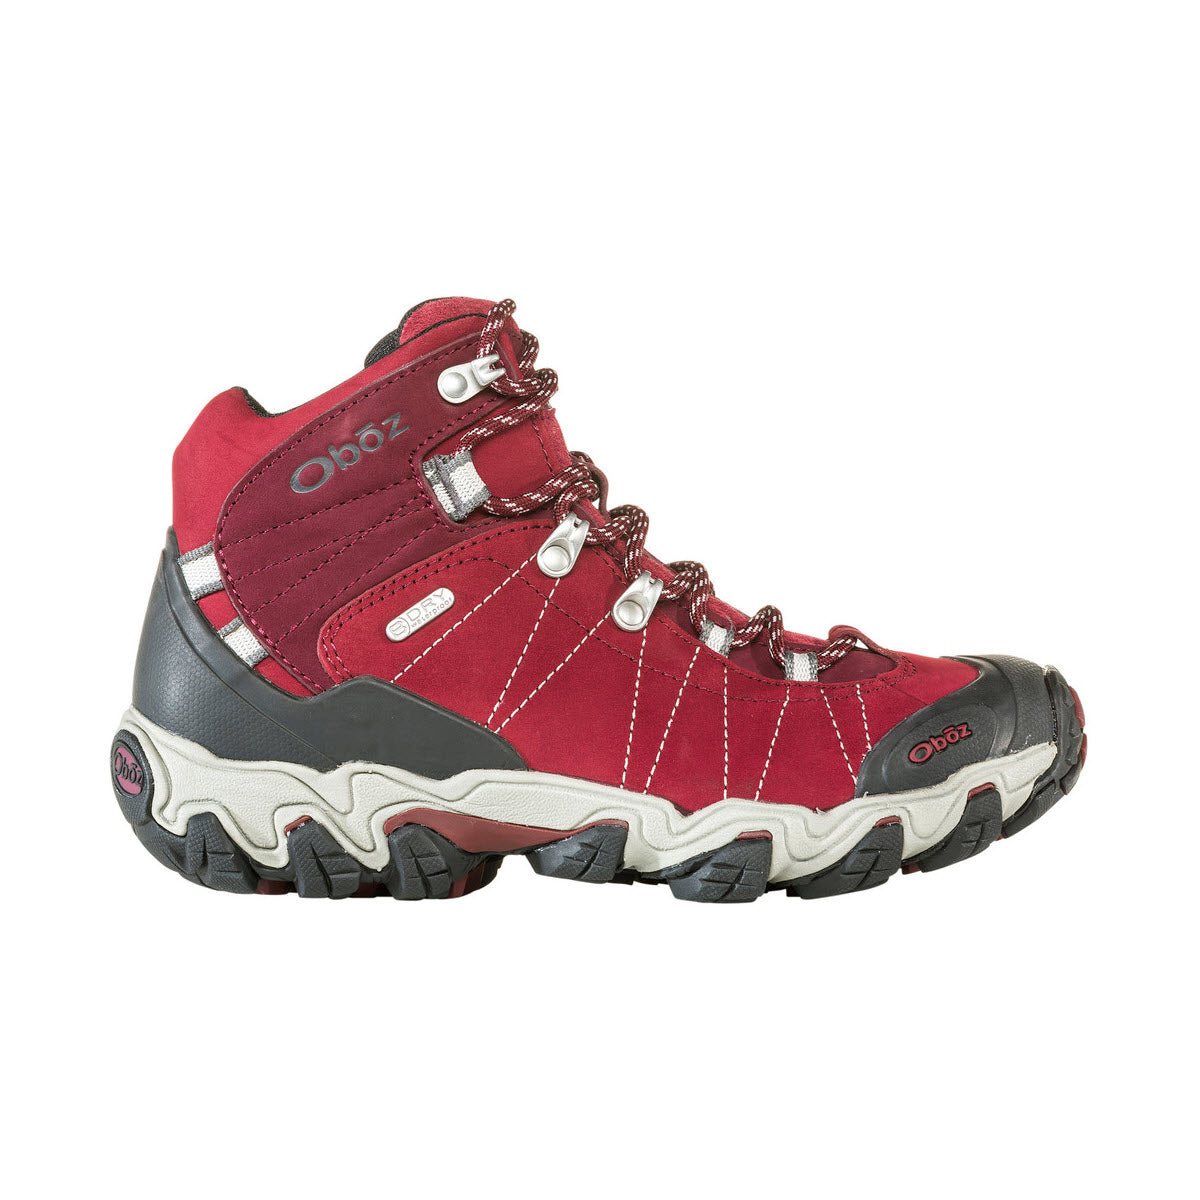 Red and gray Oboz Bridger Mid BDRY hiking boot with metal eyelets, B-DRY waterproofing, white midsole, and black outsole, shown against a white background.